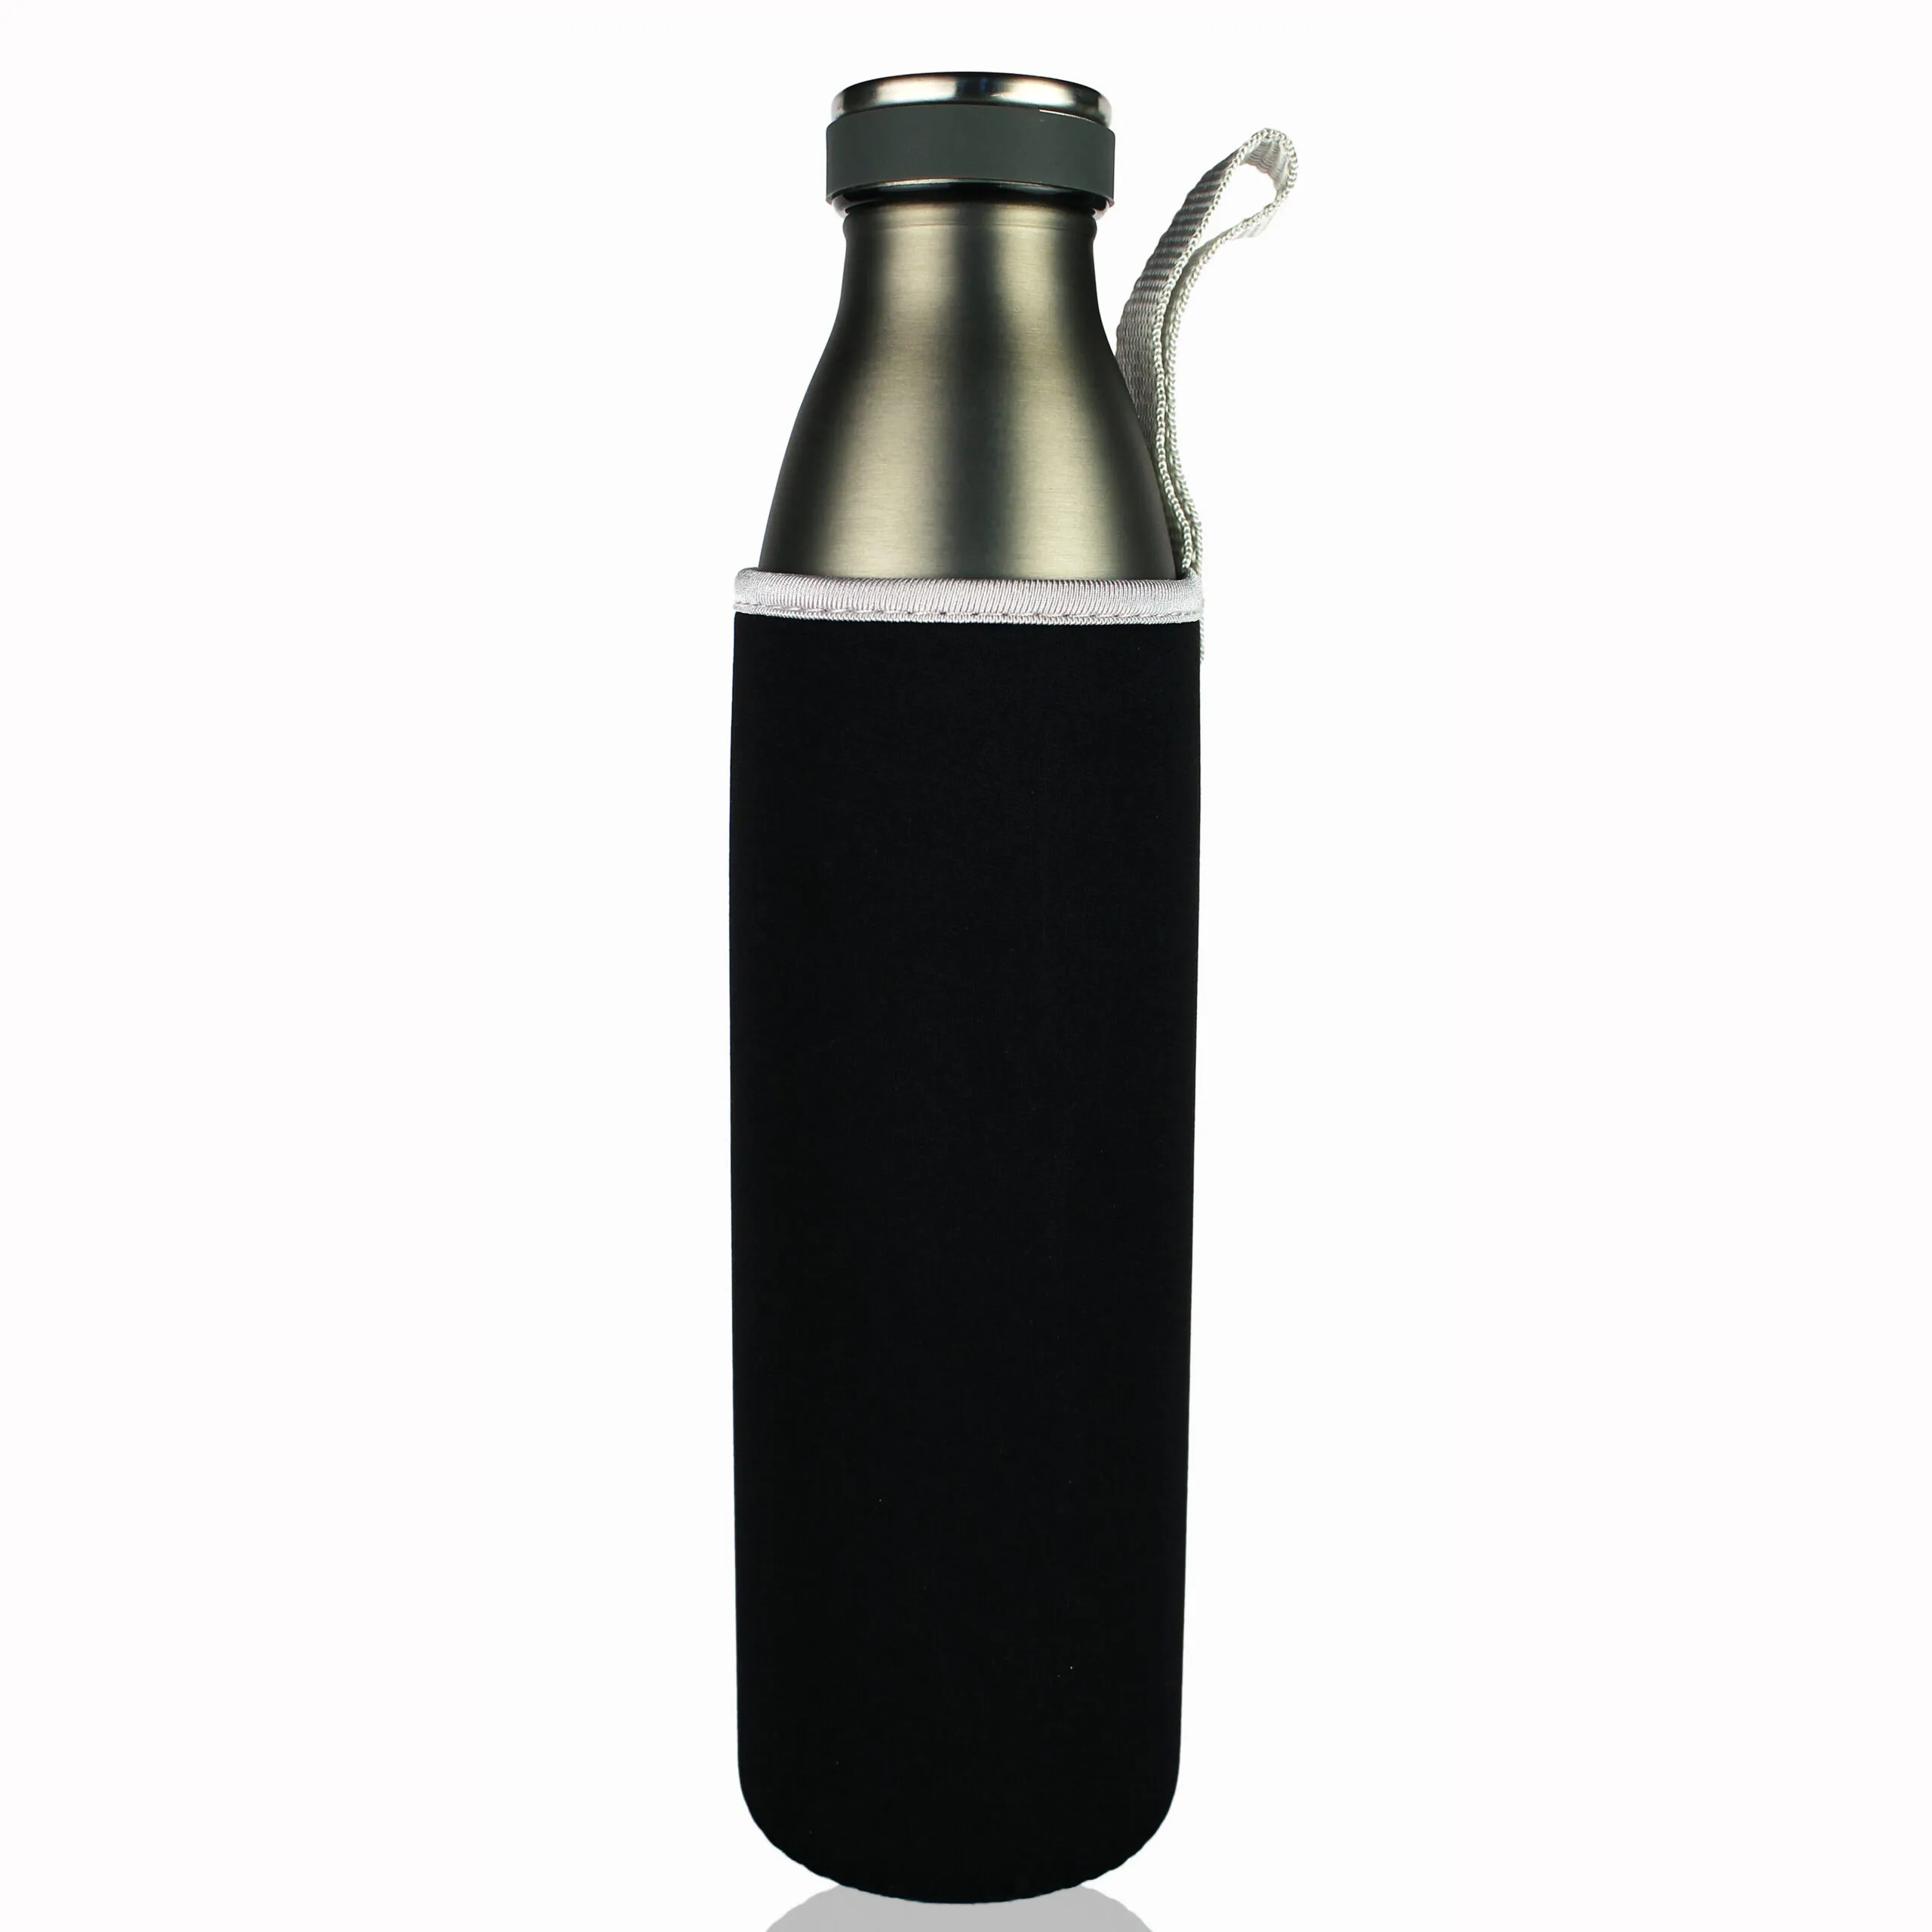 Vacuum Insulated Stainless Steel Double-Wall Thermos Flask,700ml,